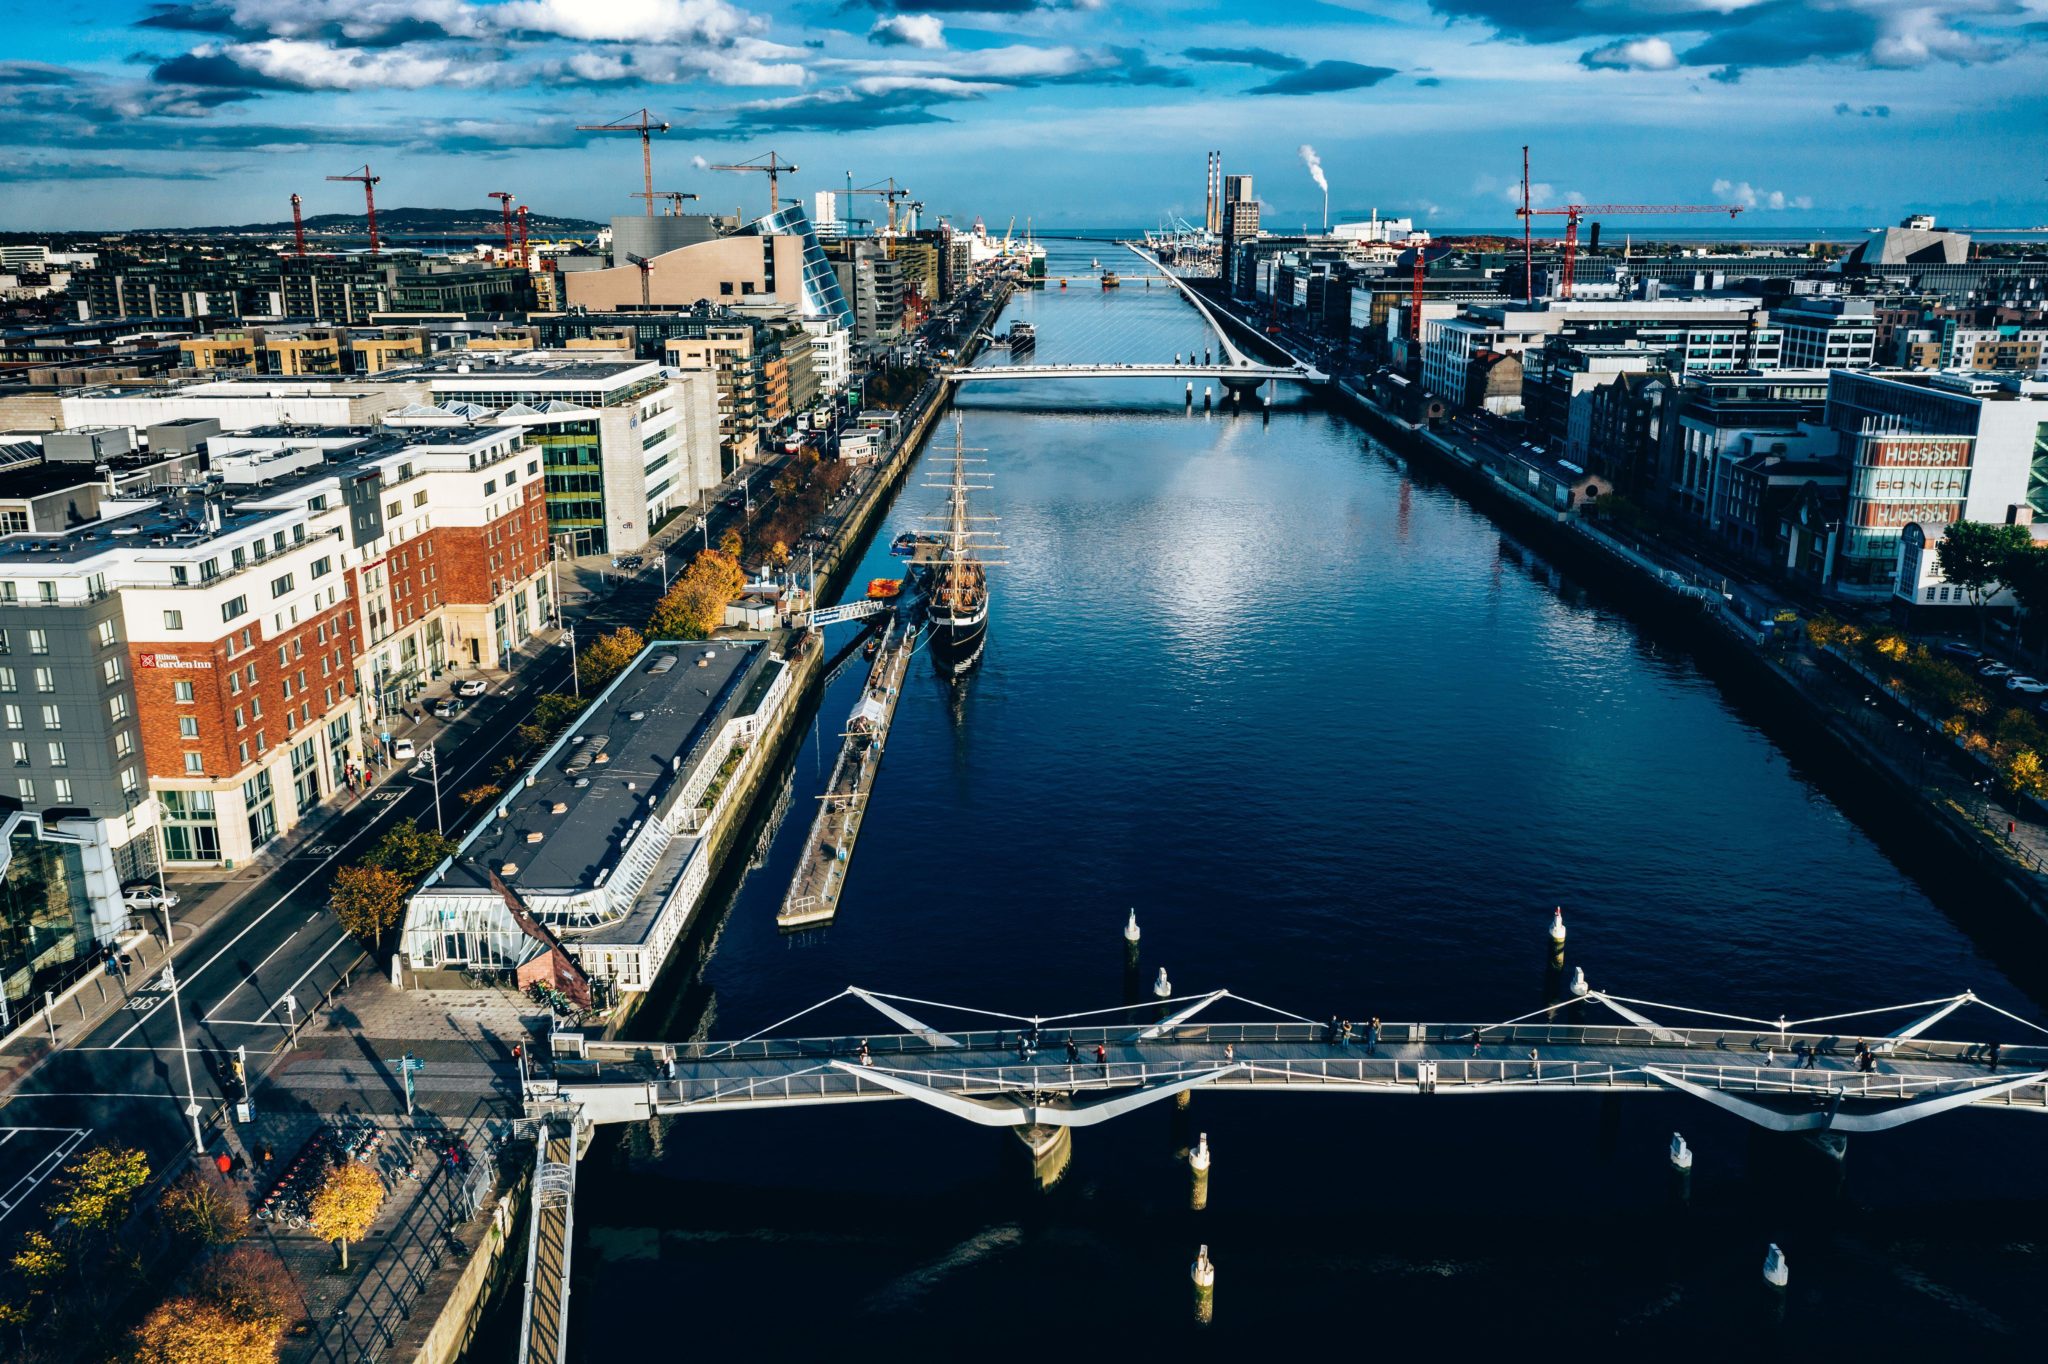 An aerial view of Dublin city over the River Liffey in October 2019